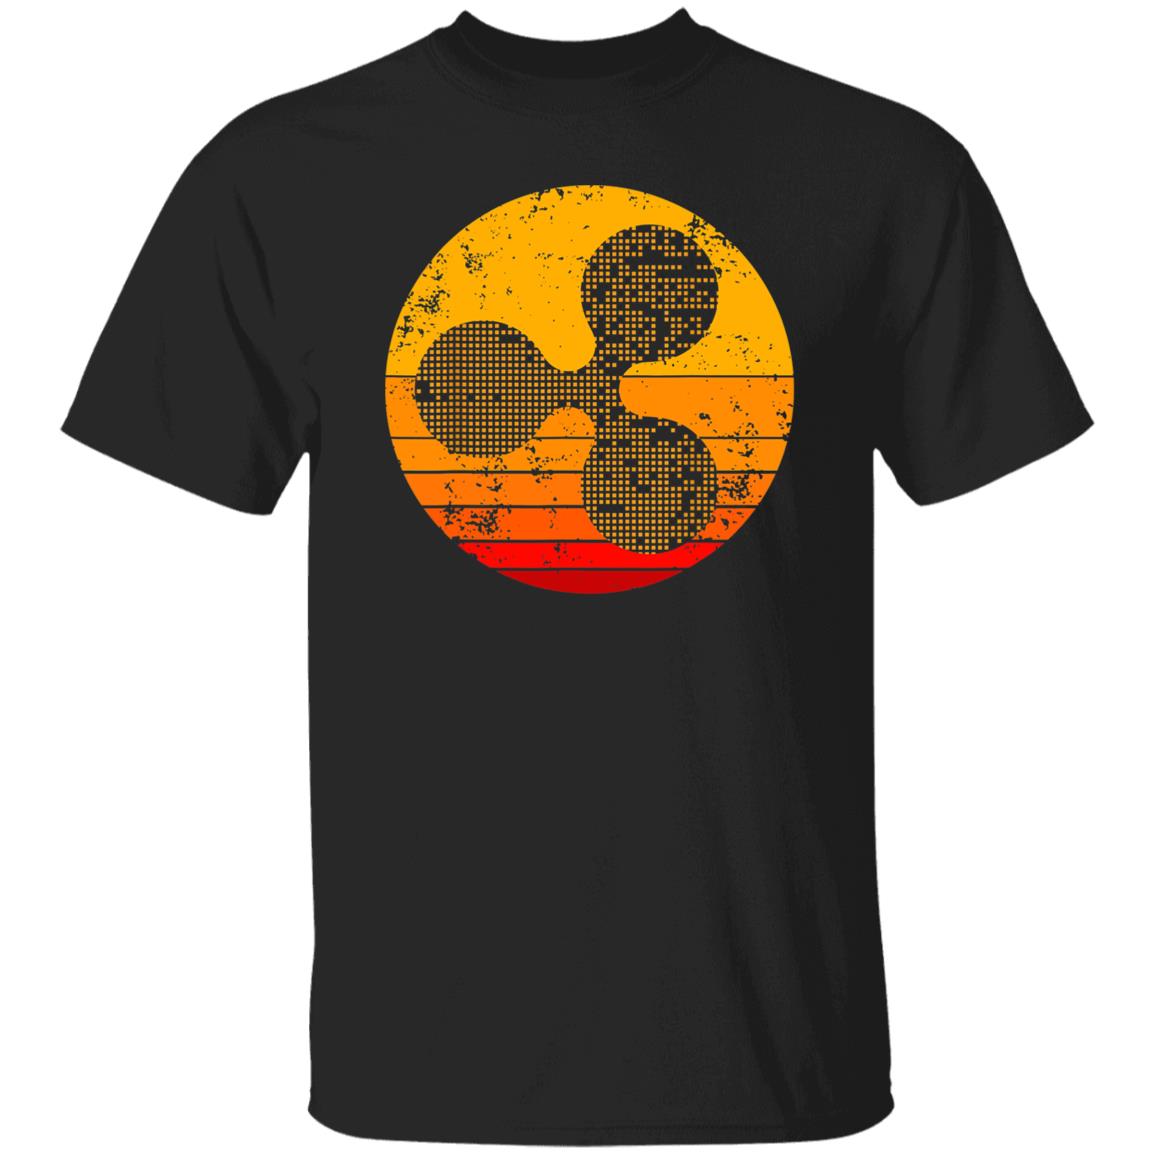 Ripple XRP Cryptocurrency Hodler Gift Shirt